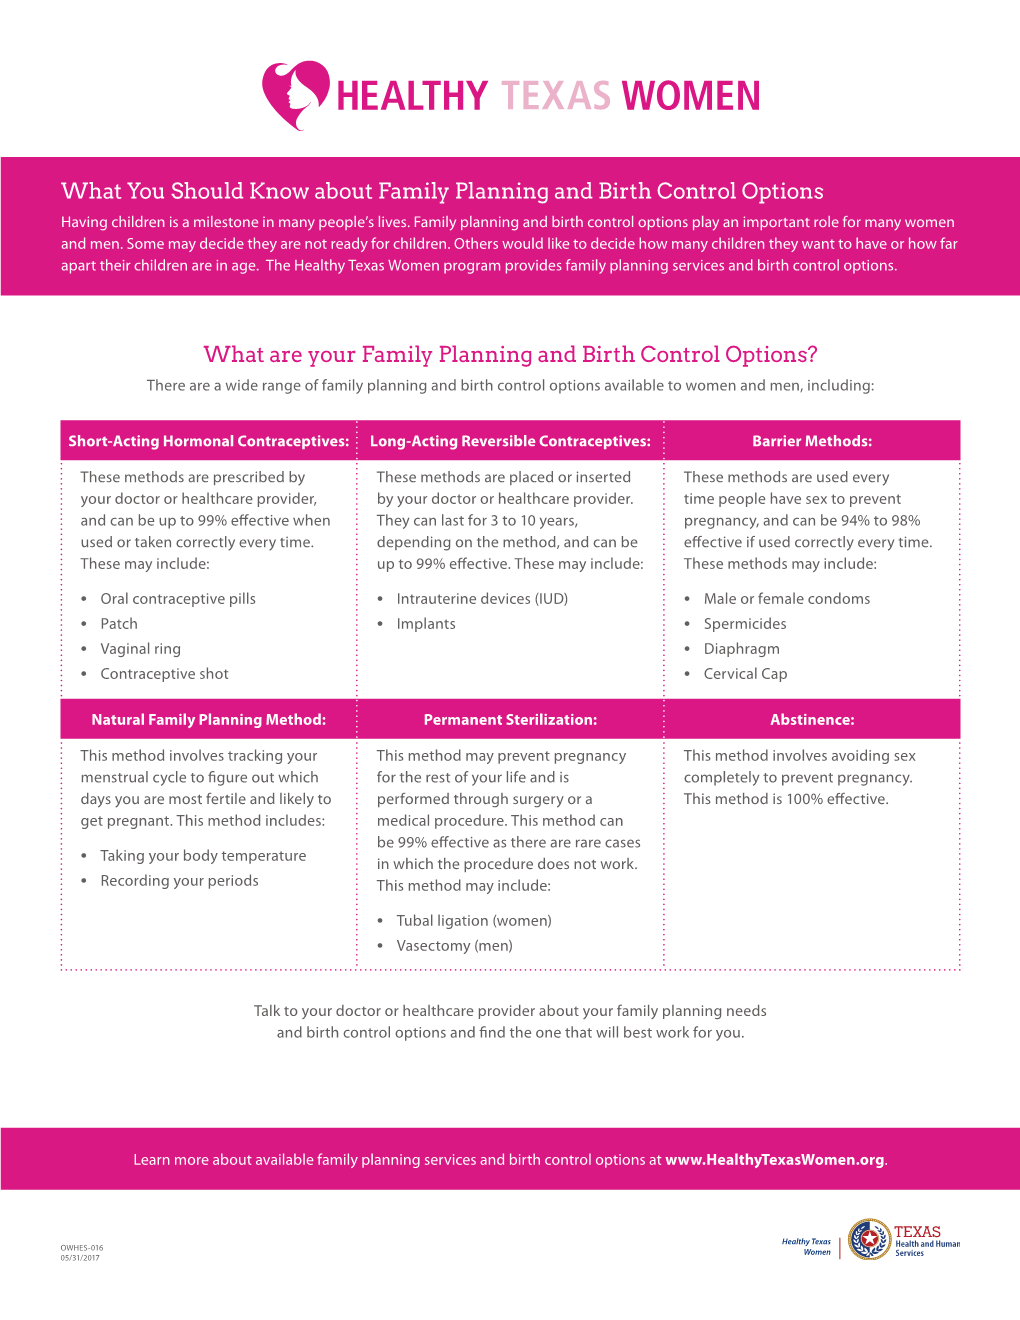 Family Planning and Birth Control Fact Sheet